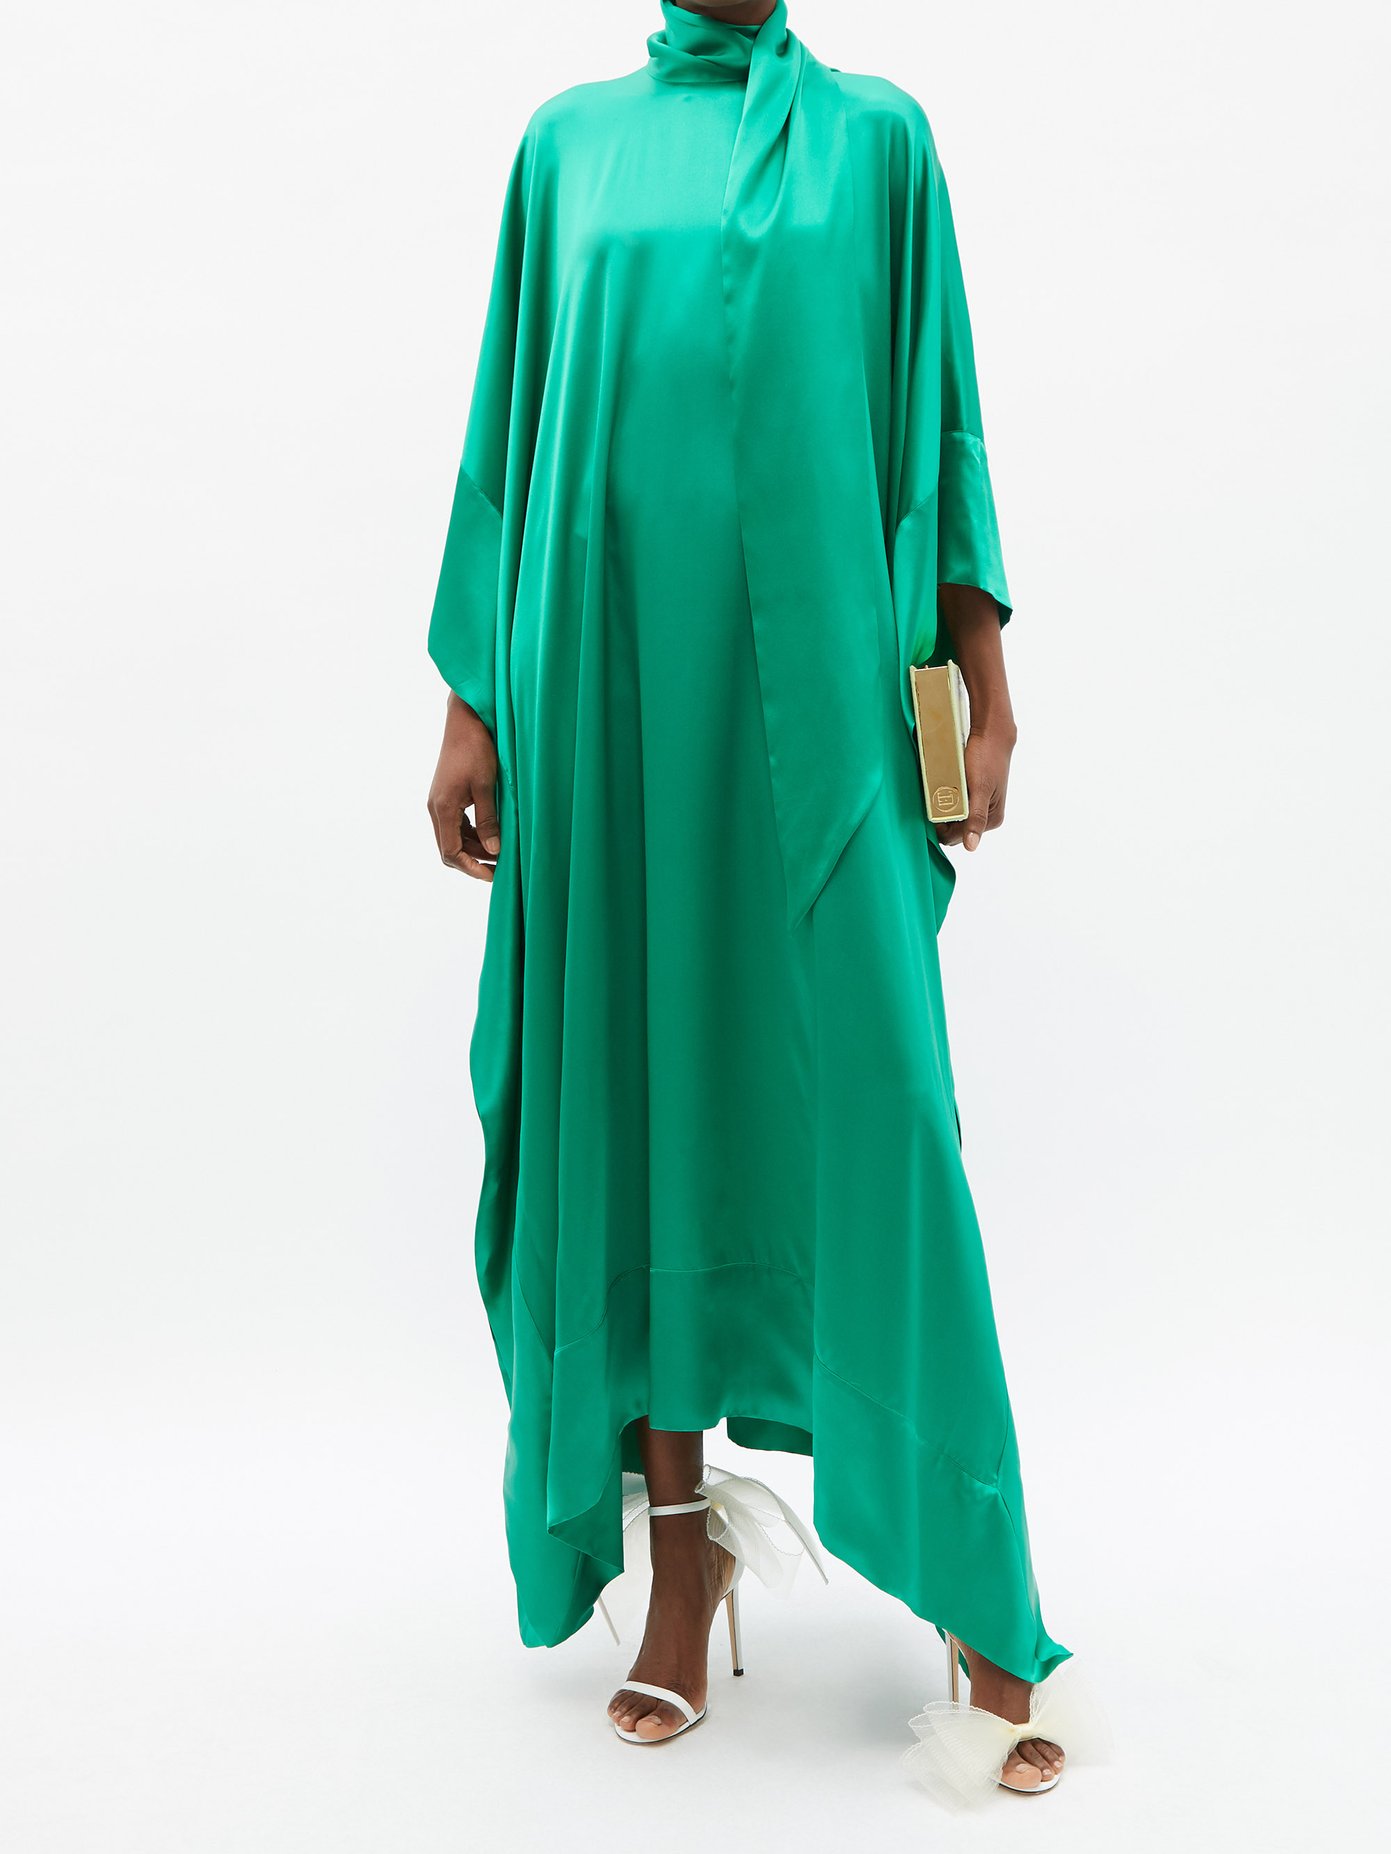 Taller Marmo's 1970s-style green New Age kaftan is cut from generous billows of green silk-satin, creating a ripple and flow of movement with every step.